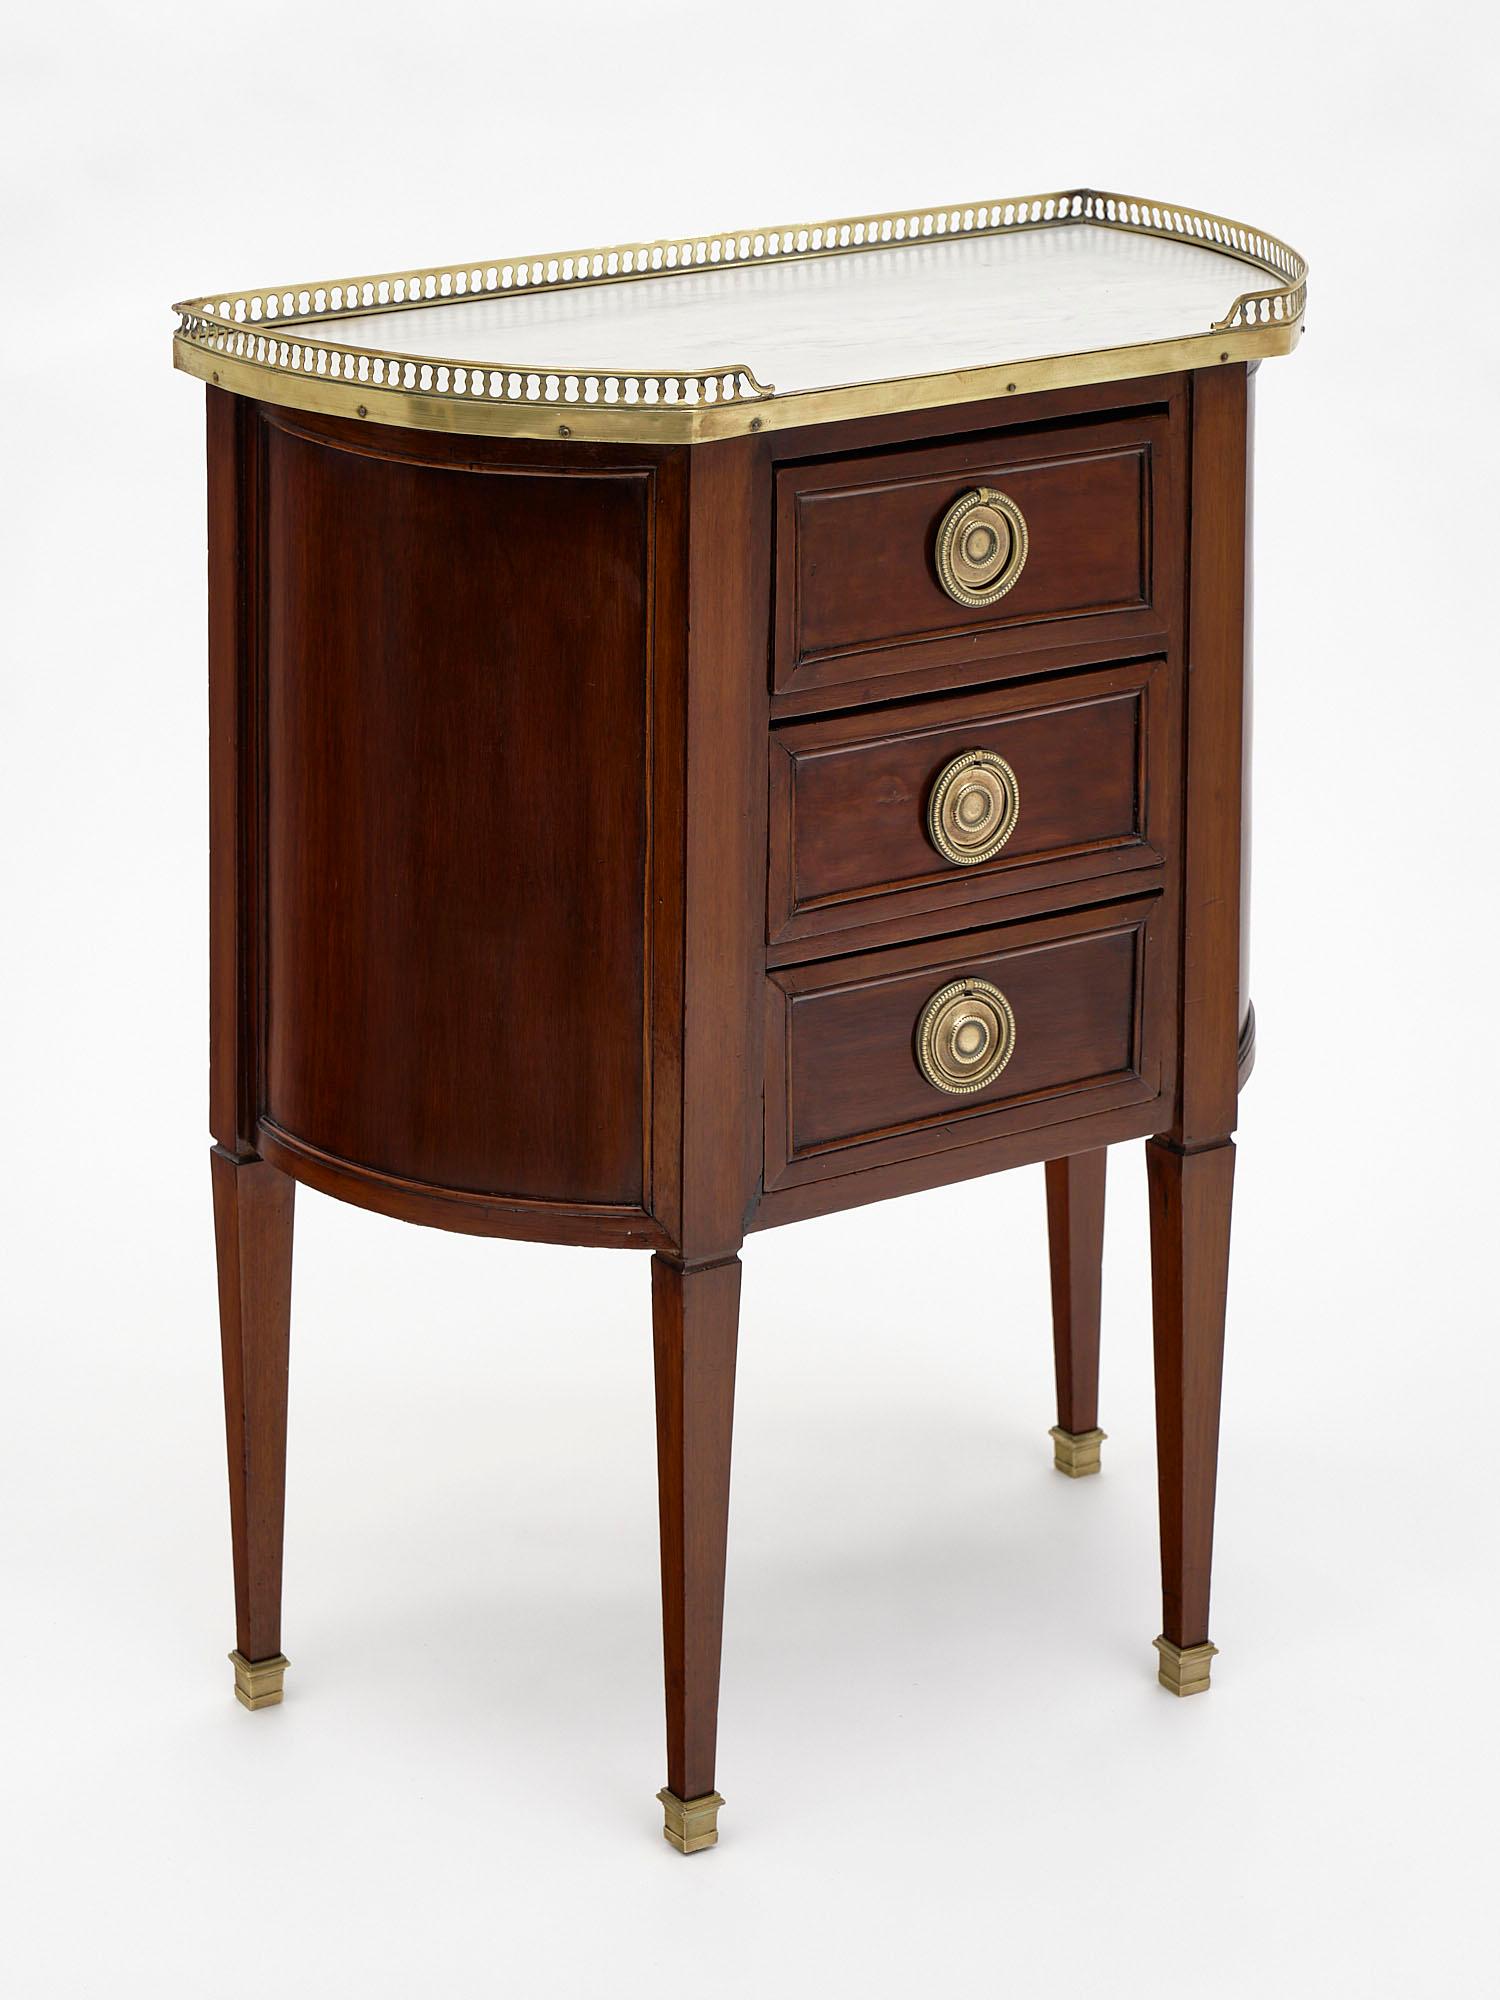 Louis XVI style French petite chest or side table made of walnut and featuring three dovetailed drawers. It is topped with Carrara marble accented with an open; gilt brass gallery. We love the finely cast bronze medallion hardware. Such a lovely